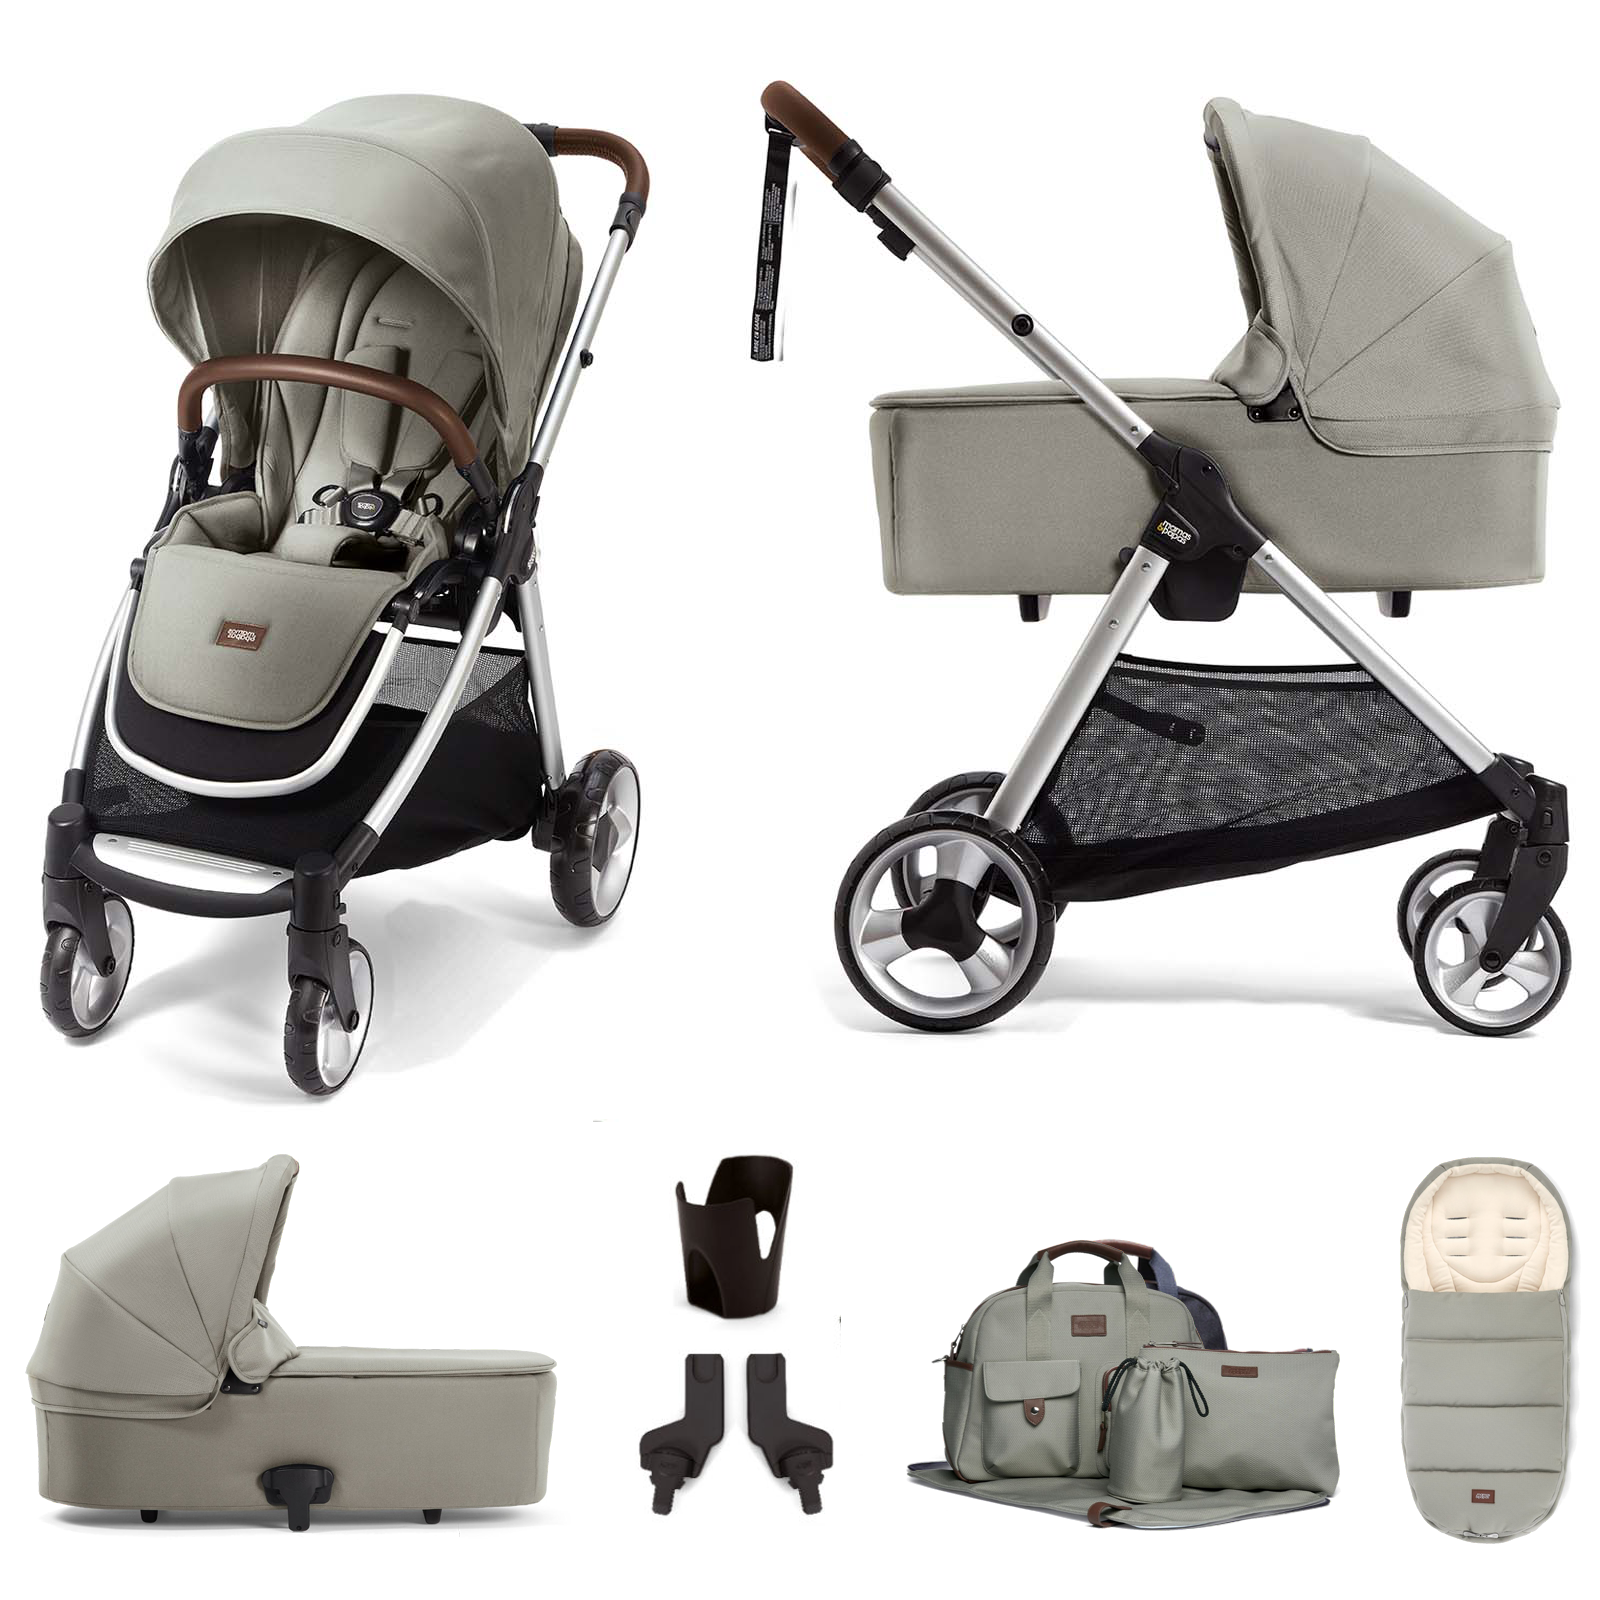 Mamas & Papas Flip XT2 (6pc) 2in1 Pushchair Stroller with Carrycot - Sage Green